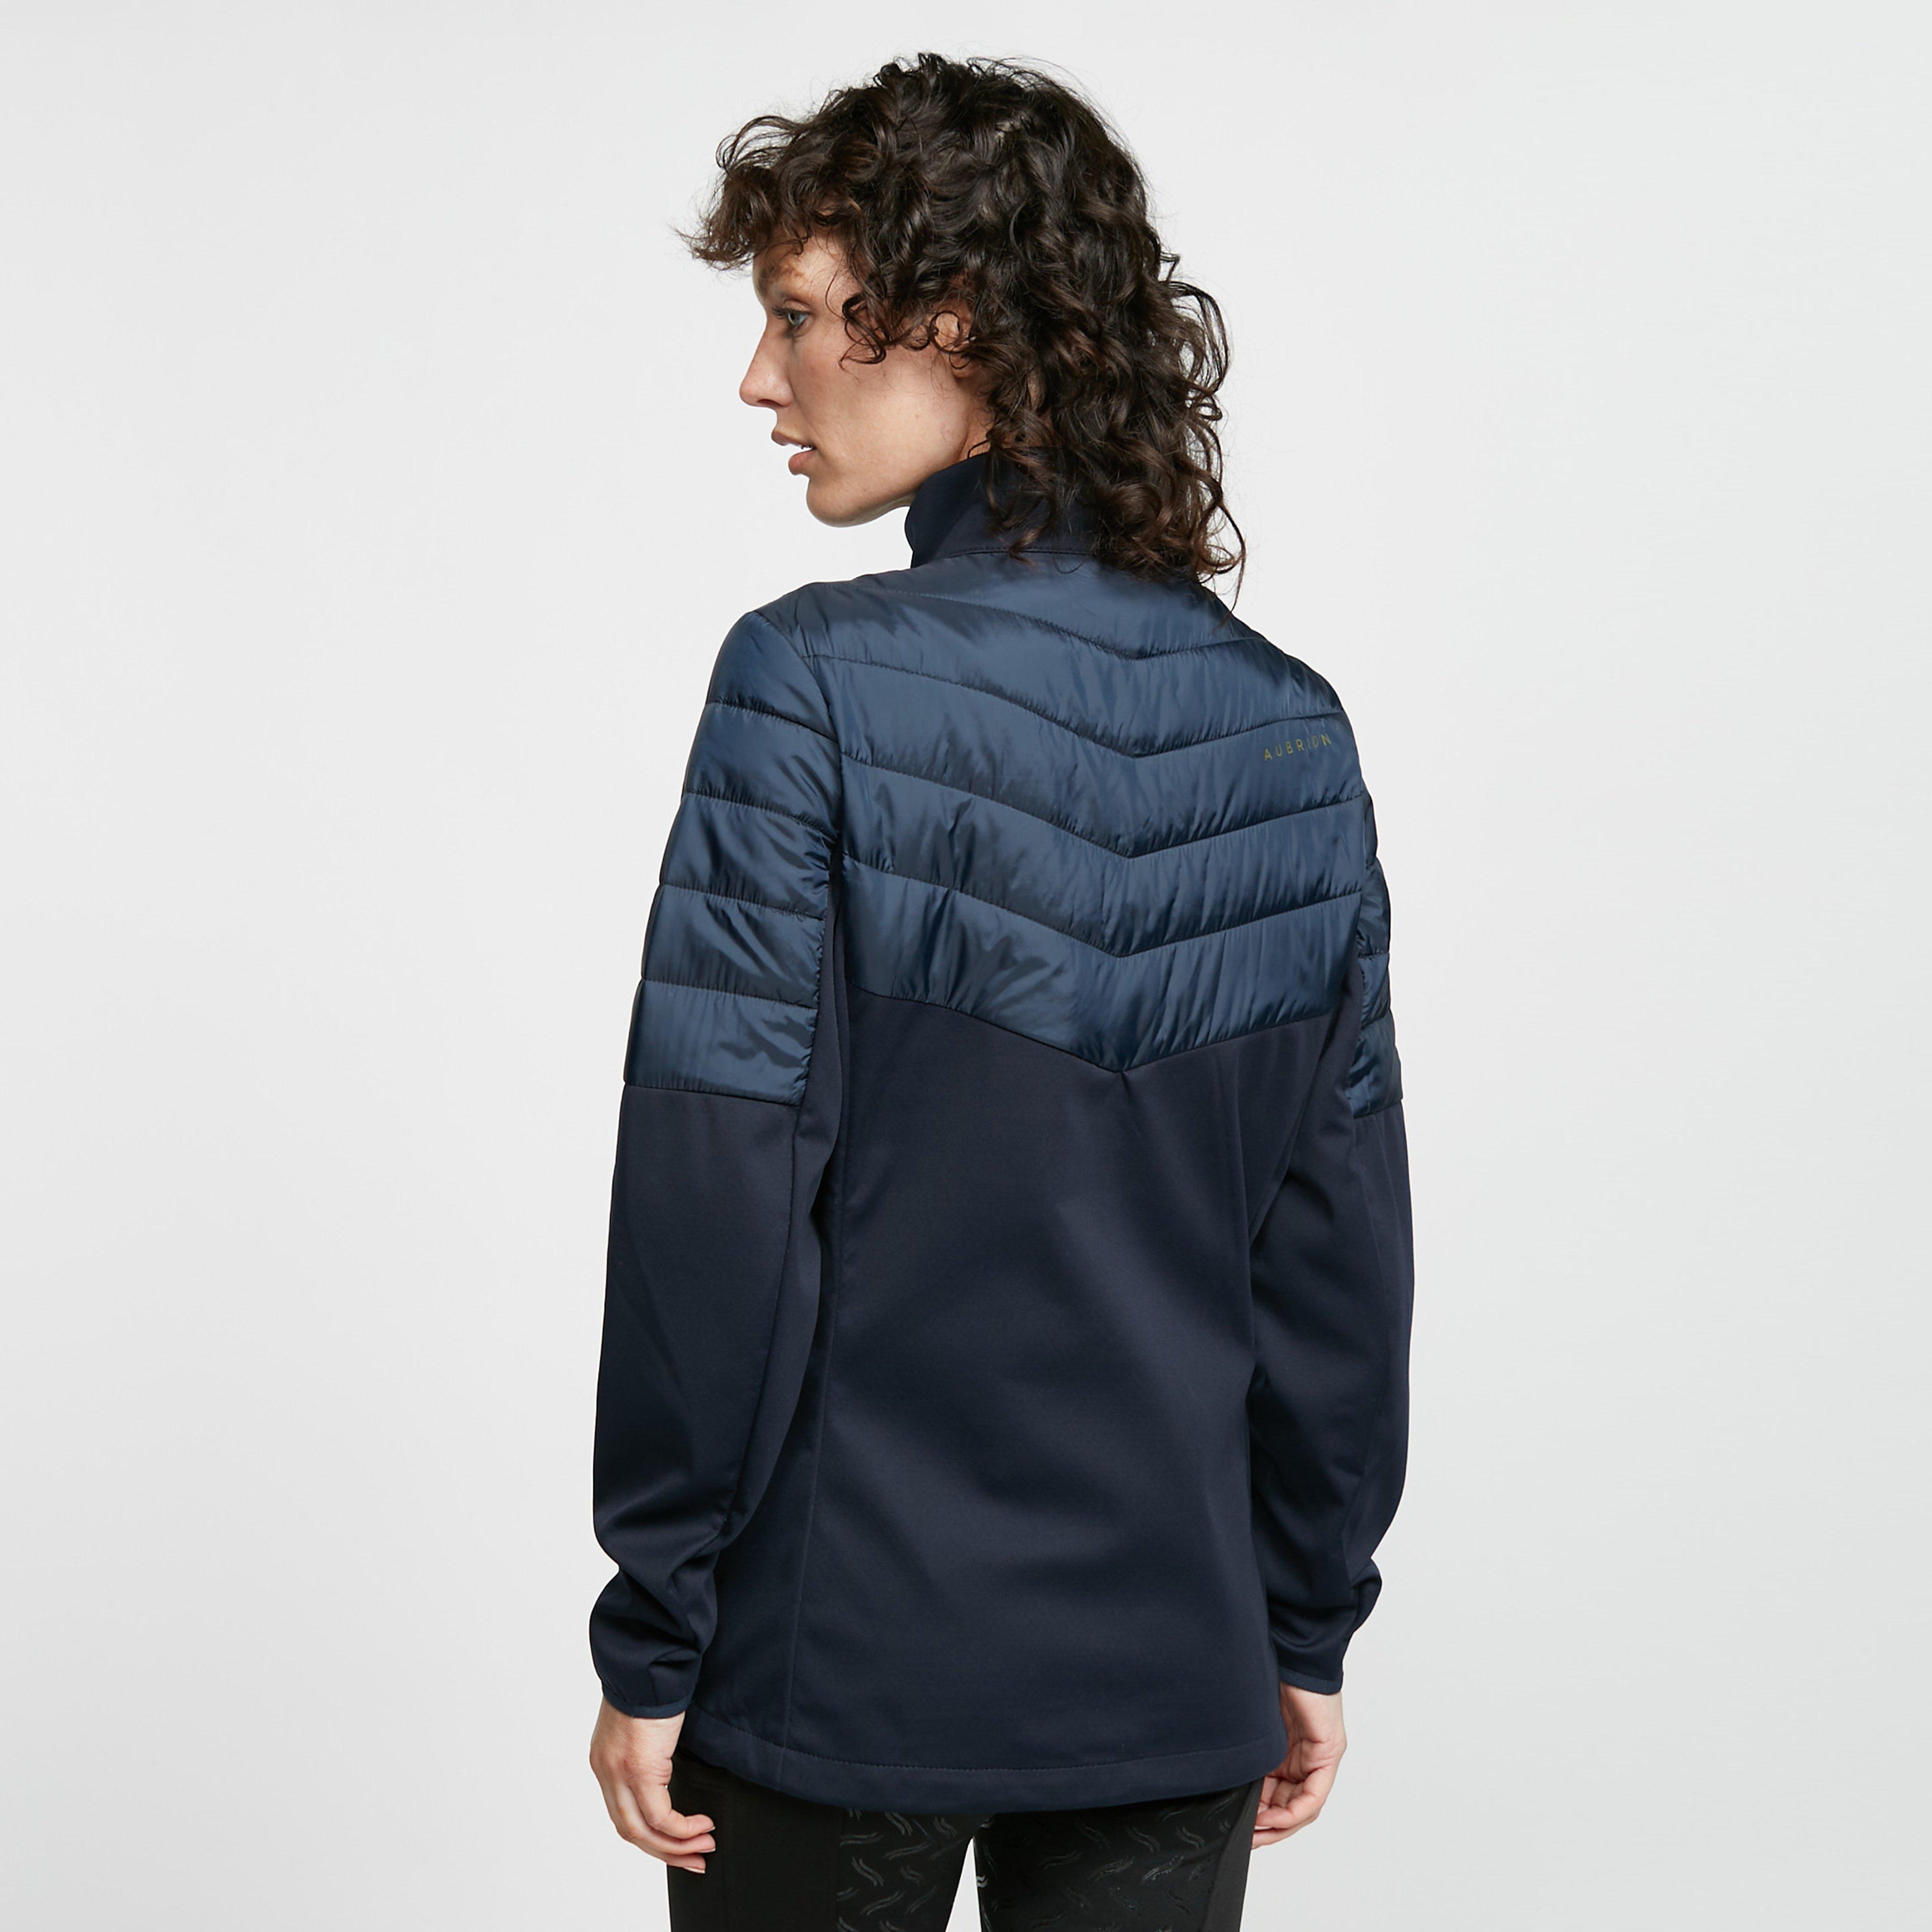 Shires Aubrion Women's Bayswater Jacket Review